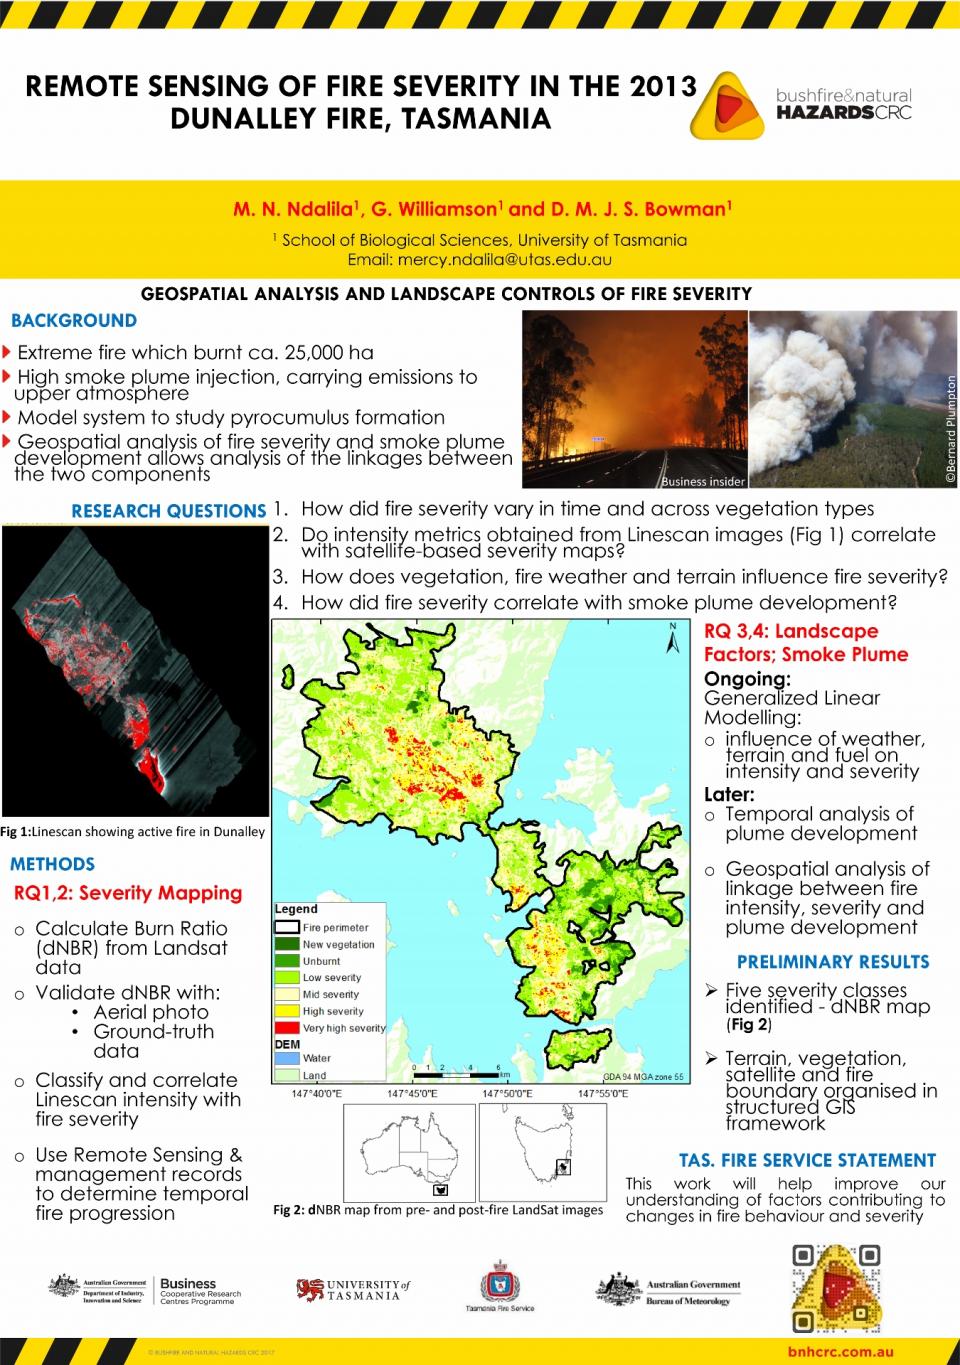 Remote sensing of fire severity in the 2013 Dunalley fire, Tasmania